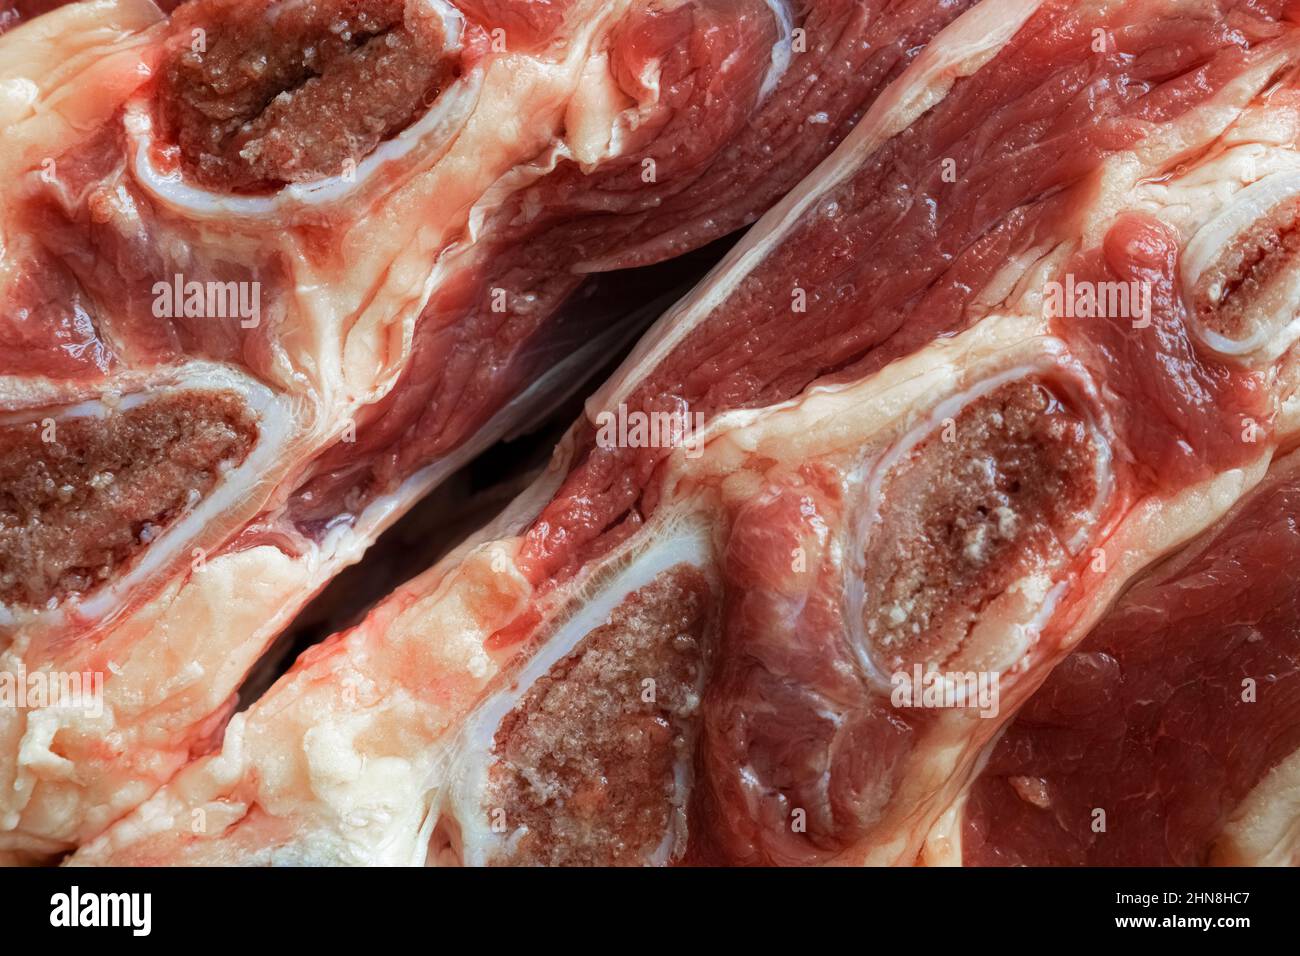 Diagonal shot of two pieces of beef with bones close-up Stock Photo